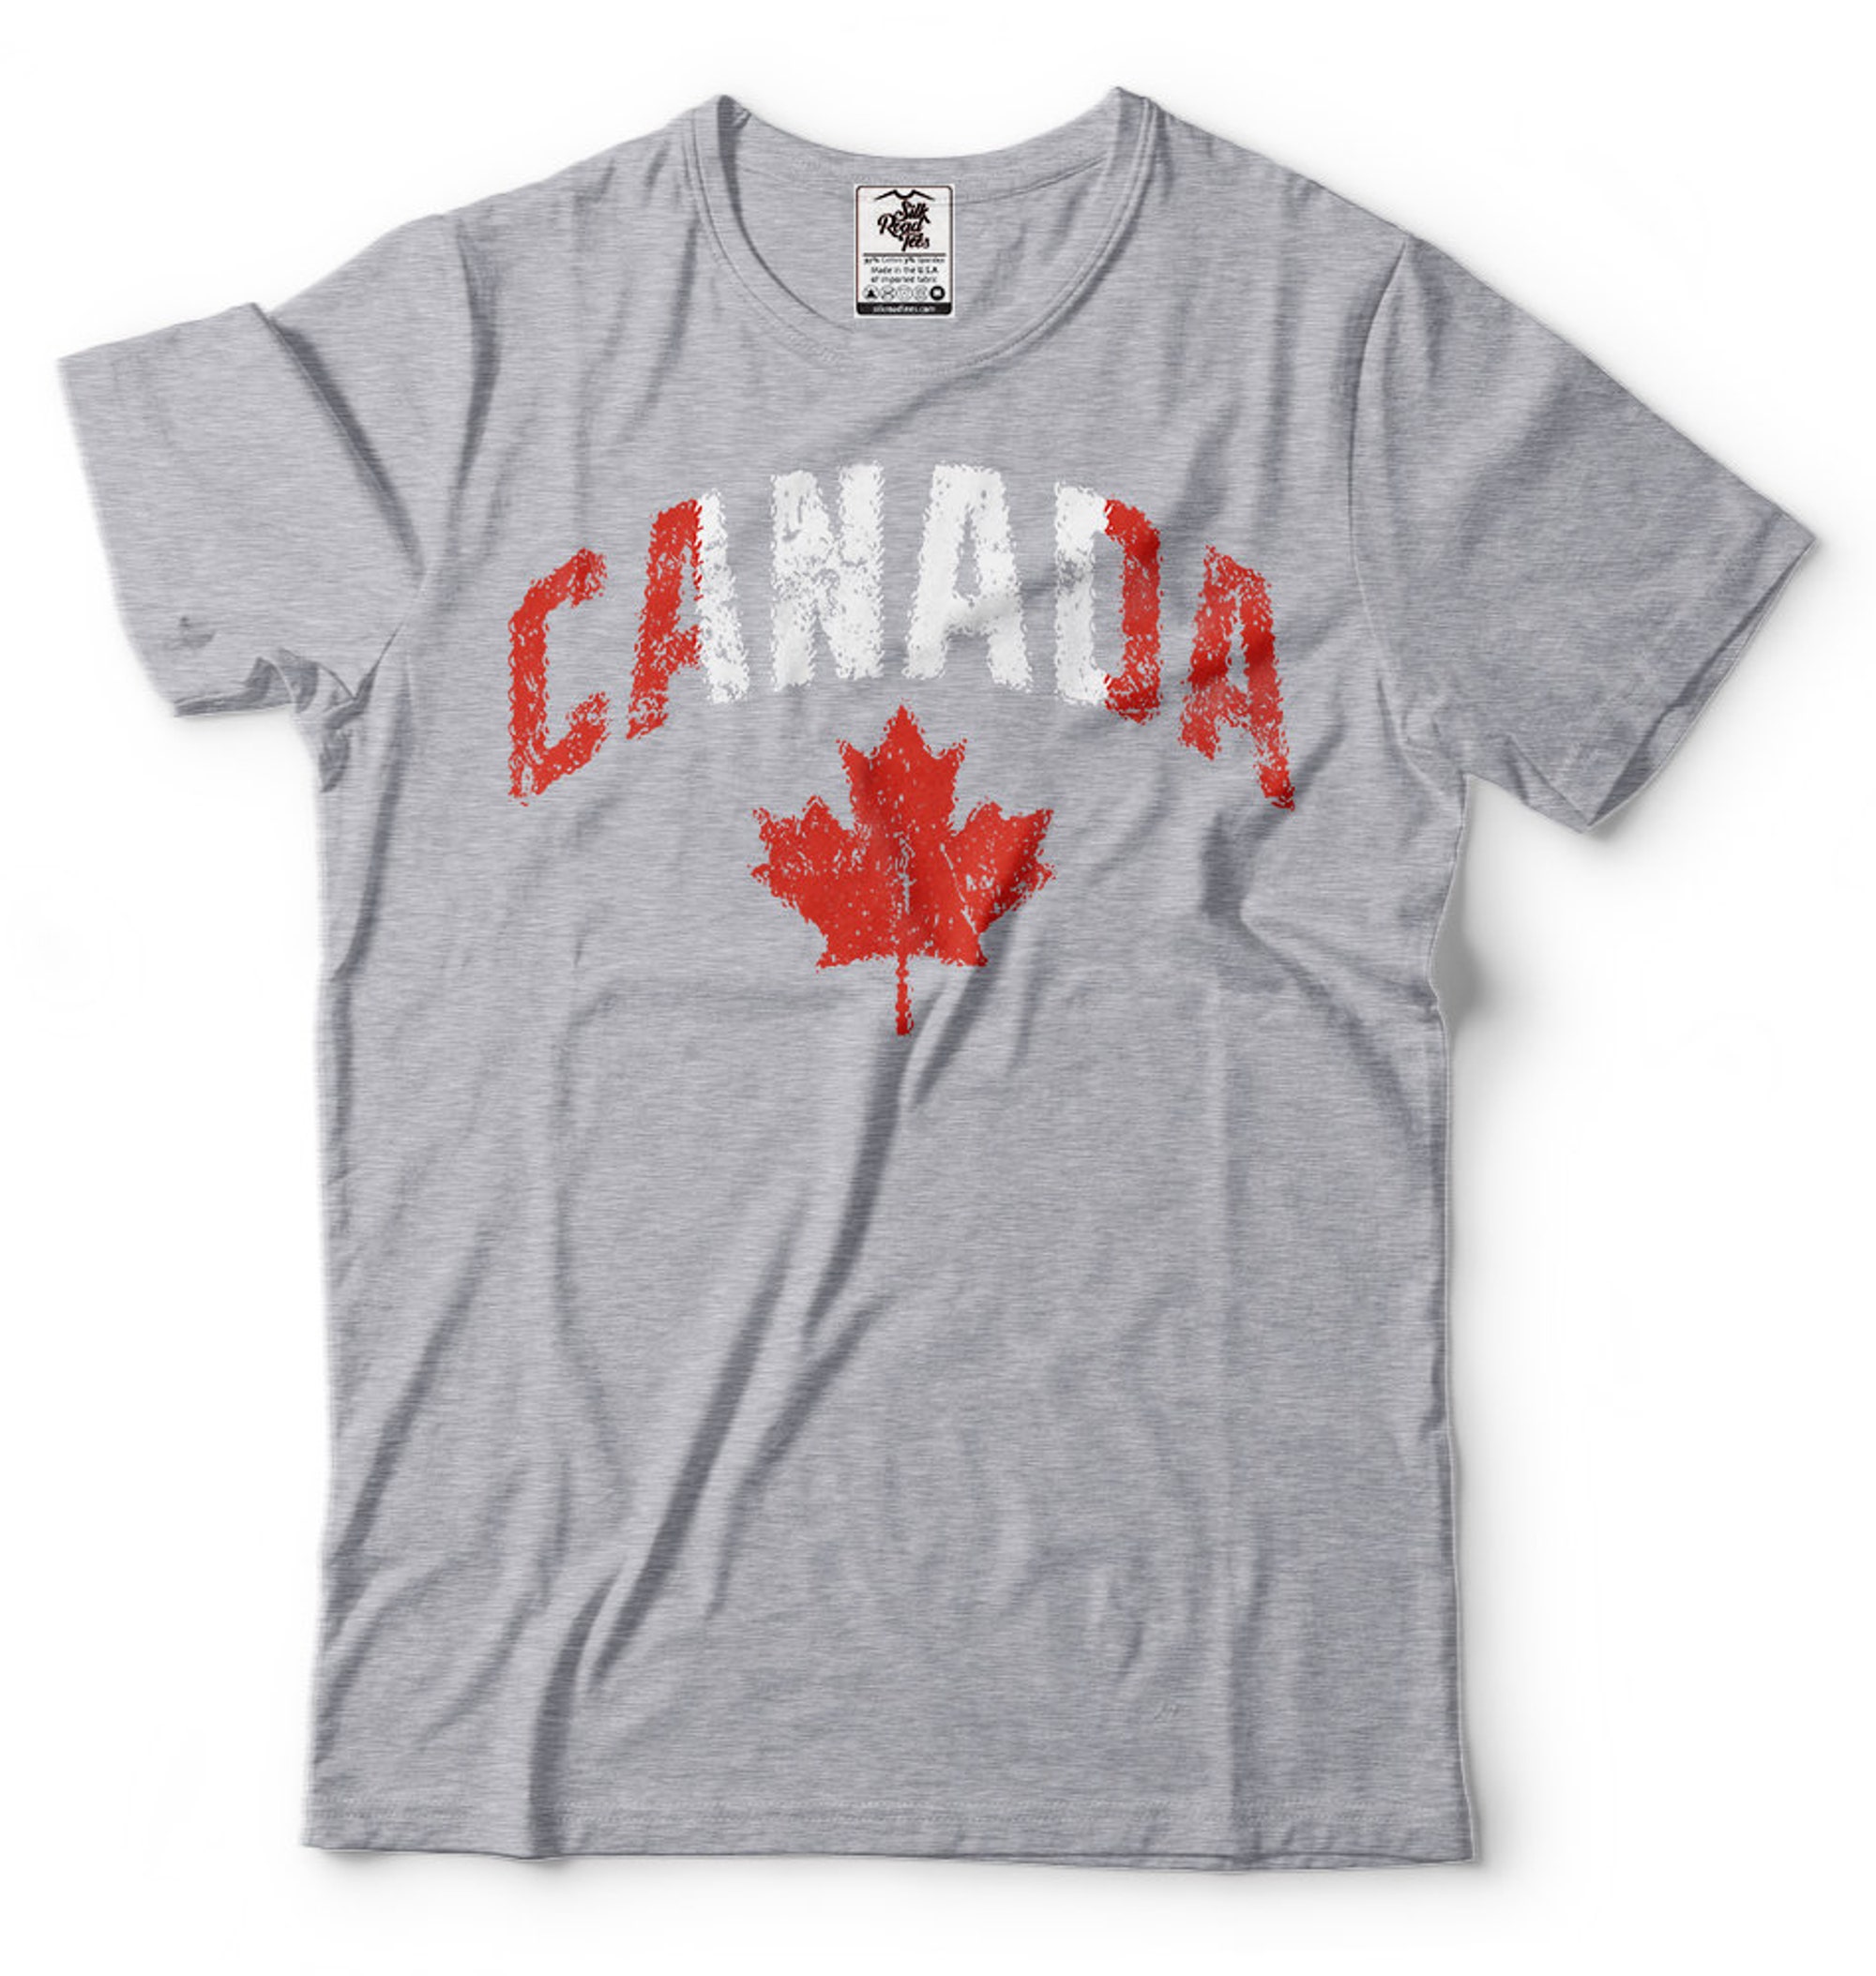 Discover Canada T-shirt Canada Maple Leaf Flag T-shirt Canadian Heritage National Day Mens Unisex Fit T-shirt